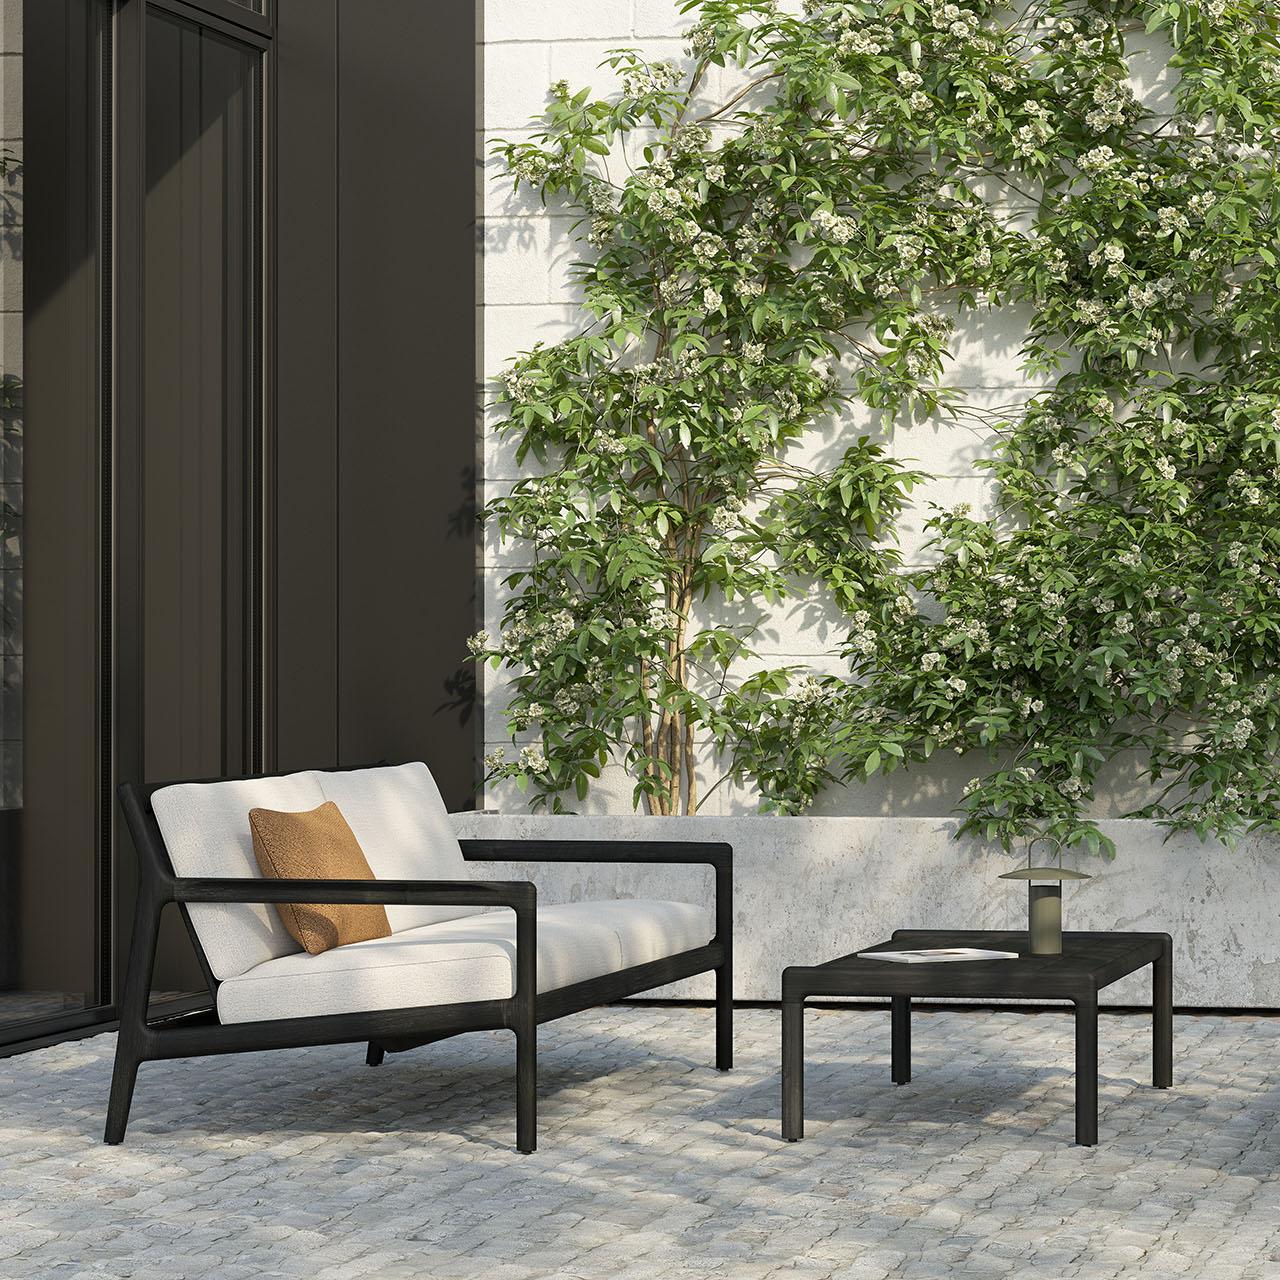 Live Light | Design your new outdoor lounge by renting furniture with Live Light